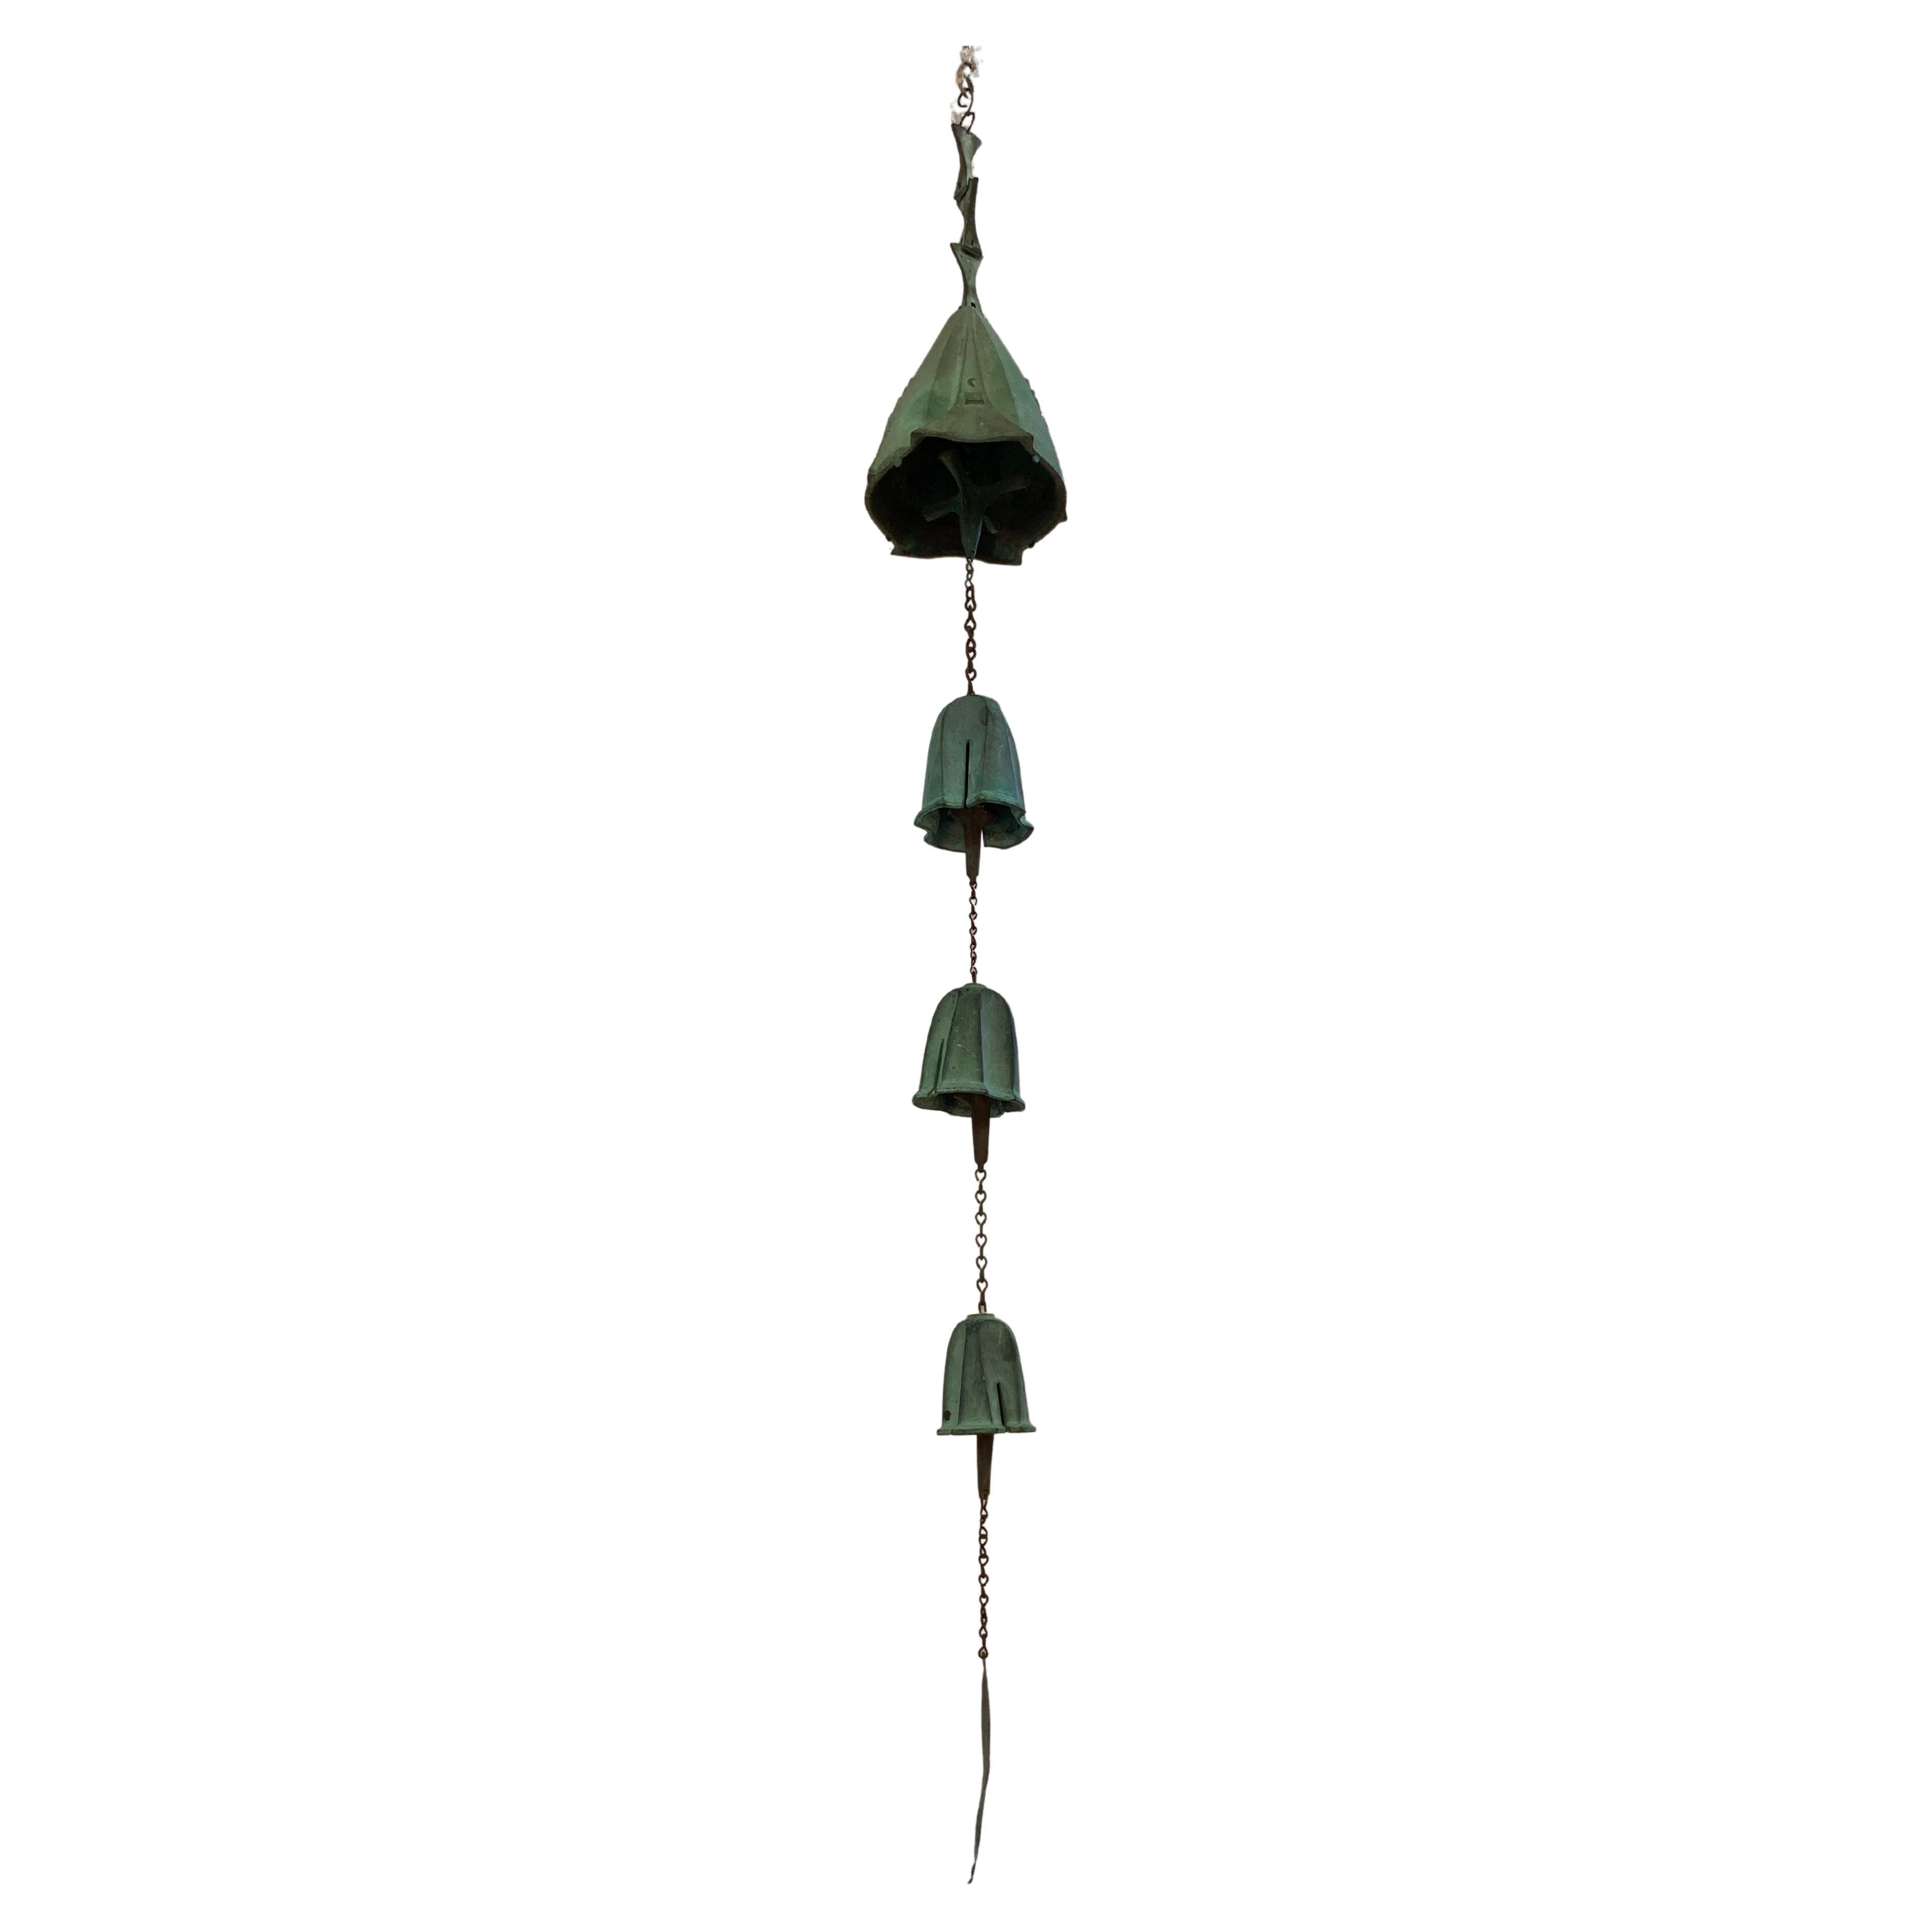 Bronze Large Wind Chime by Paolo Soleri